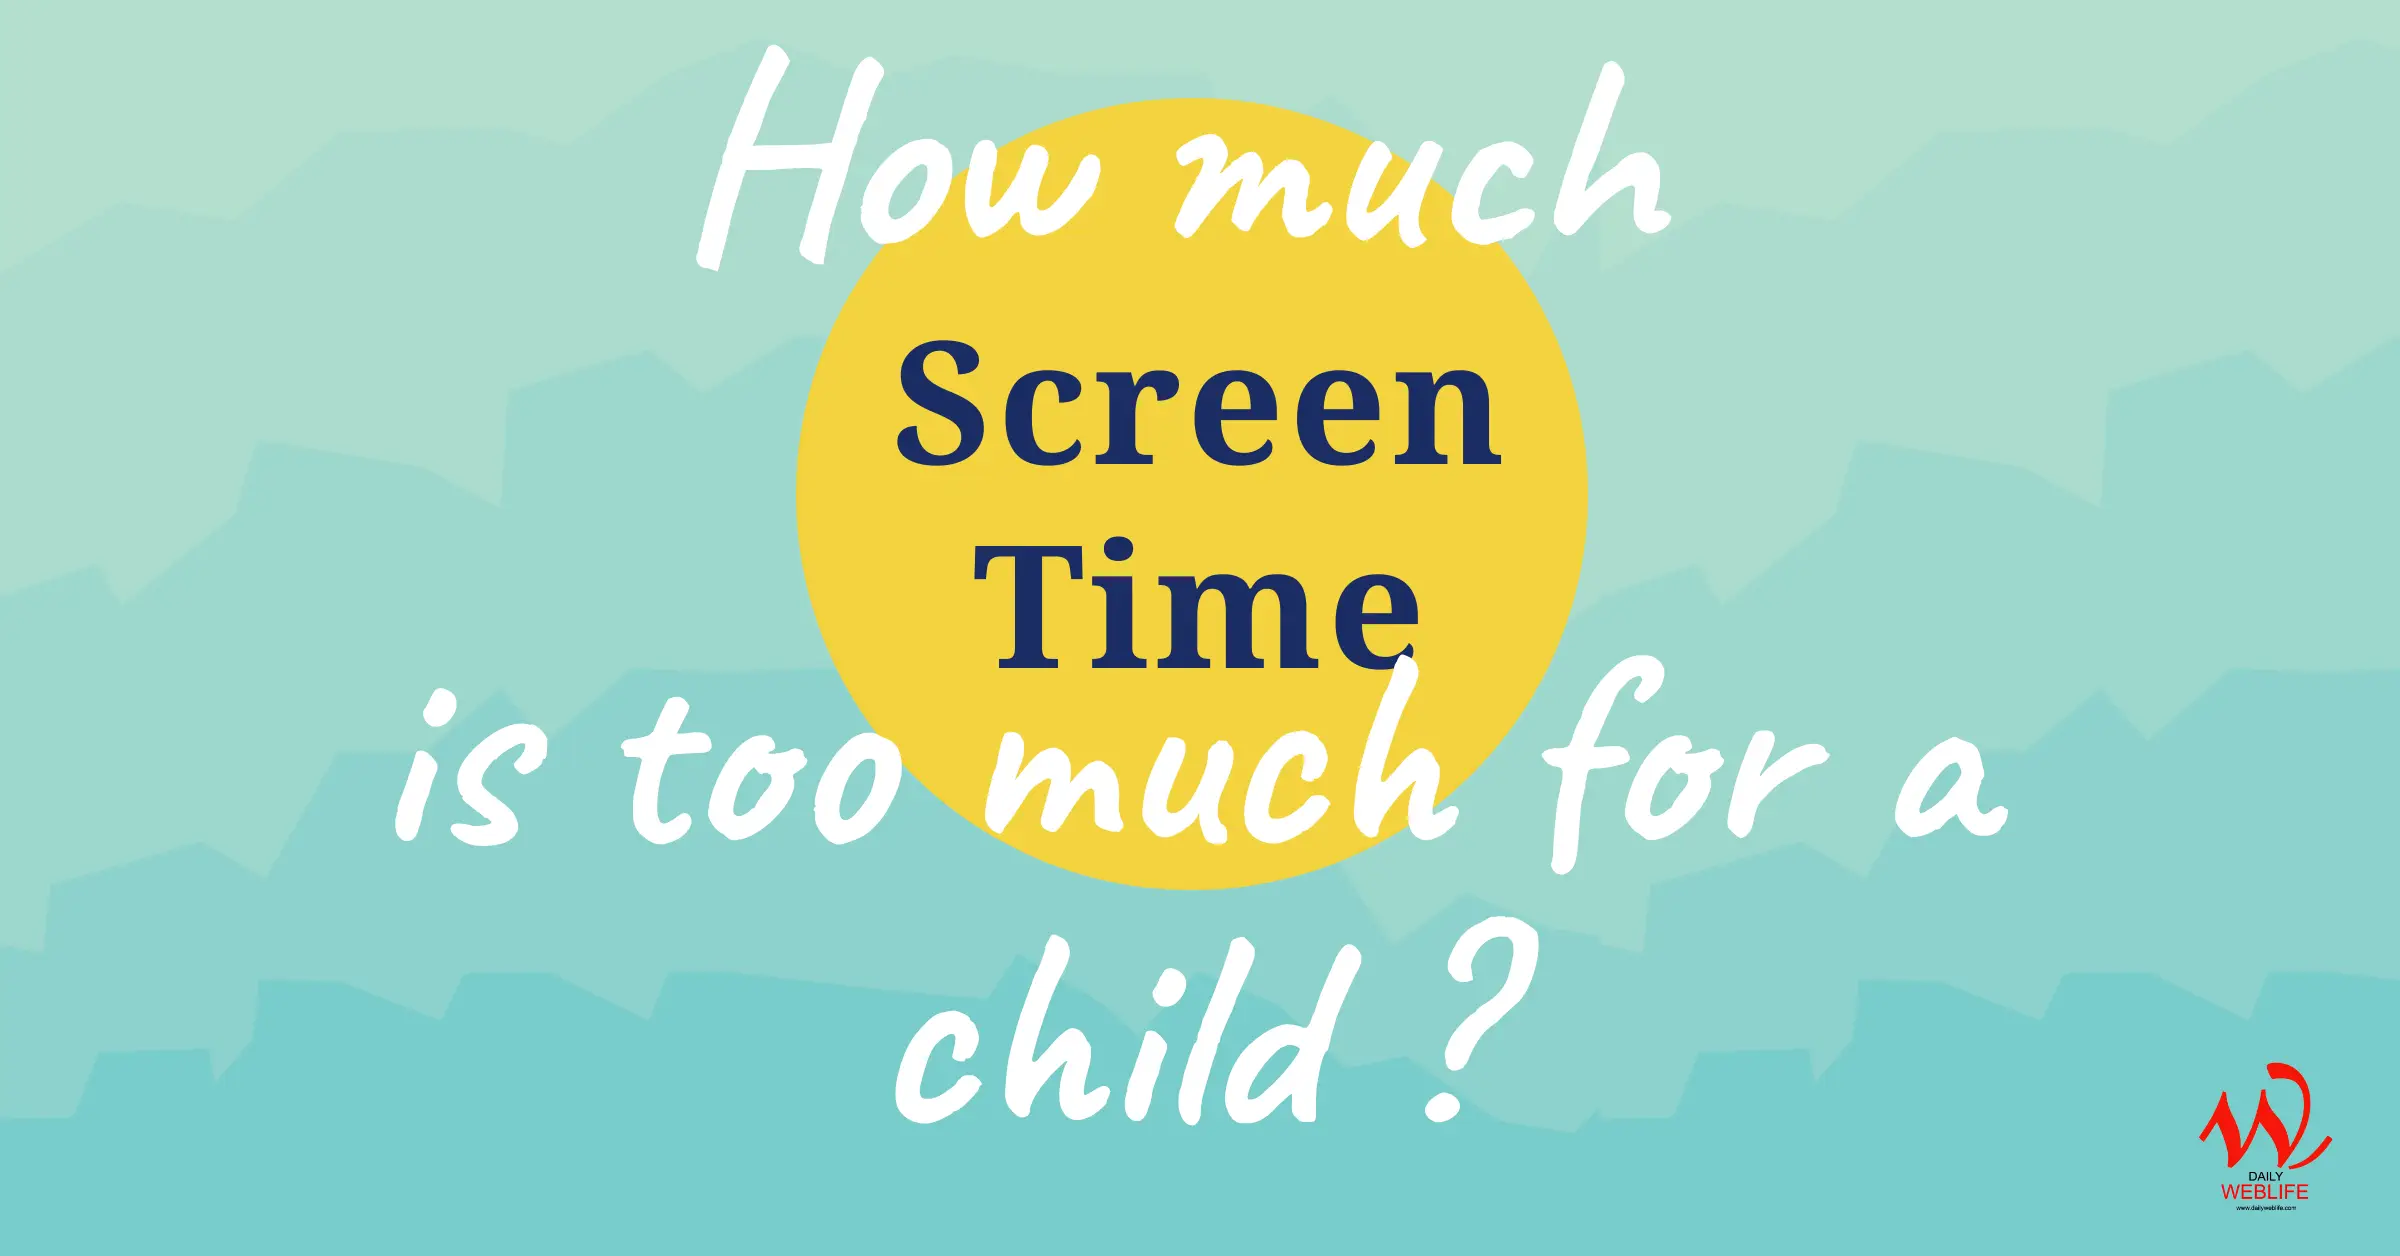 how much screen time is too much for a child